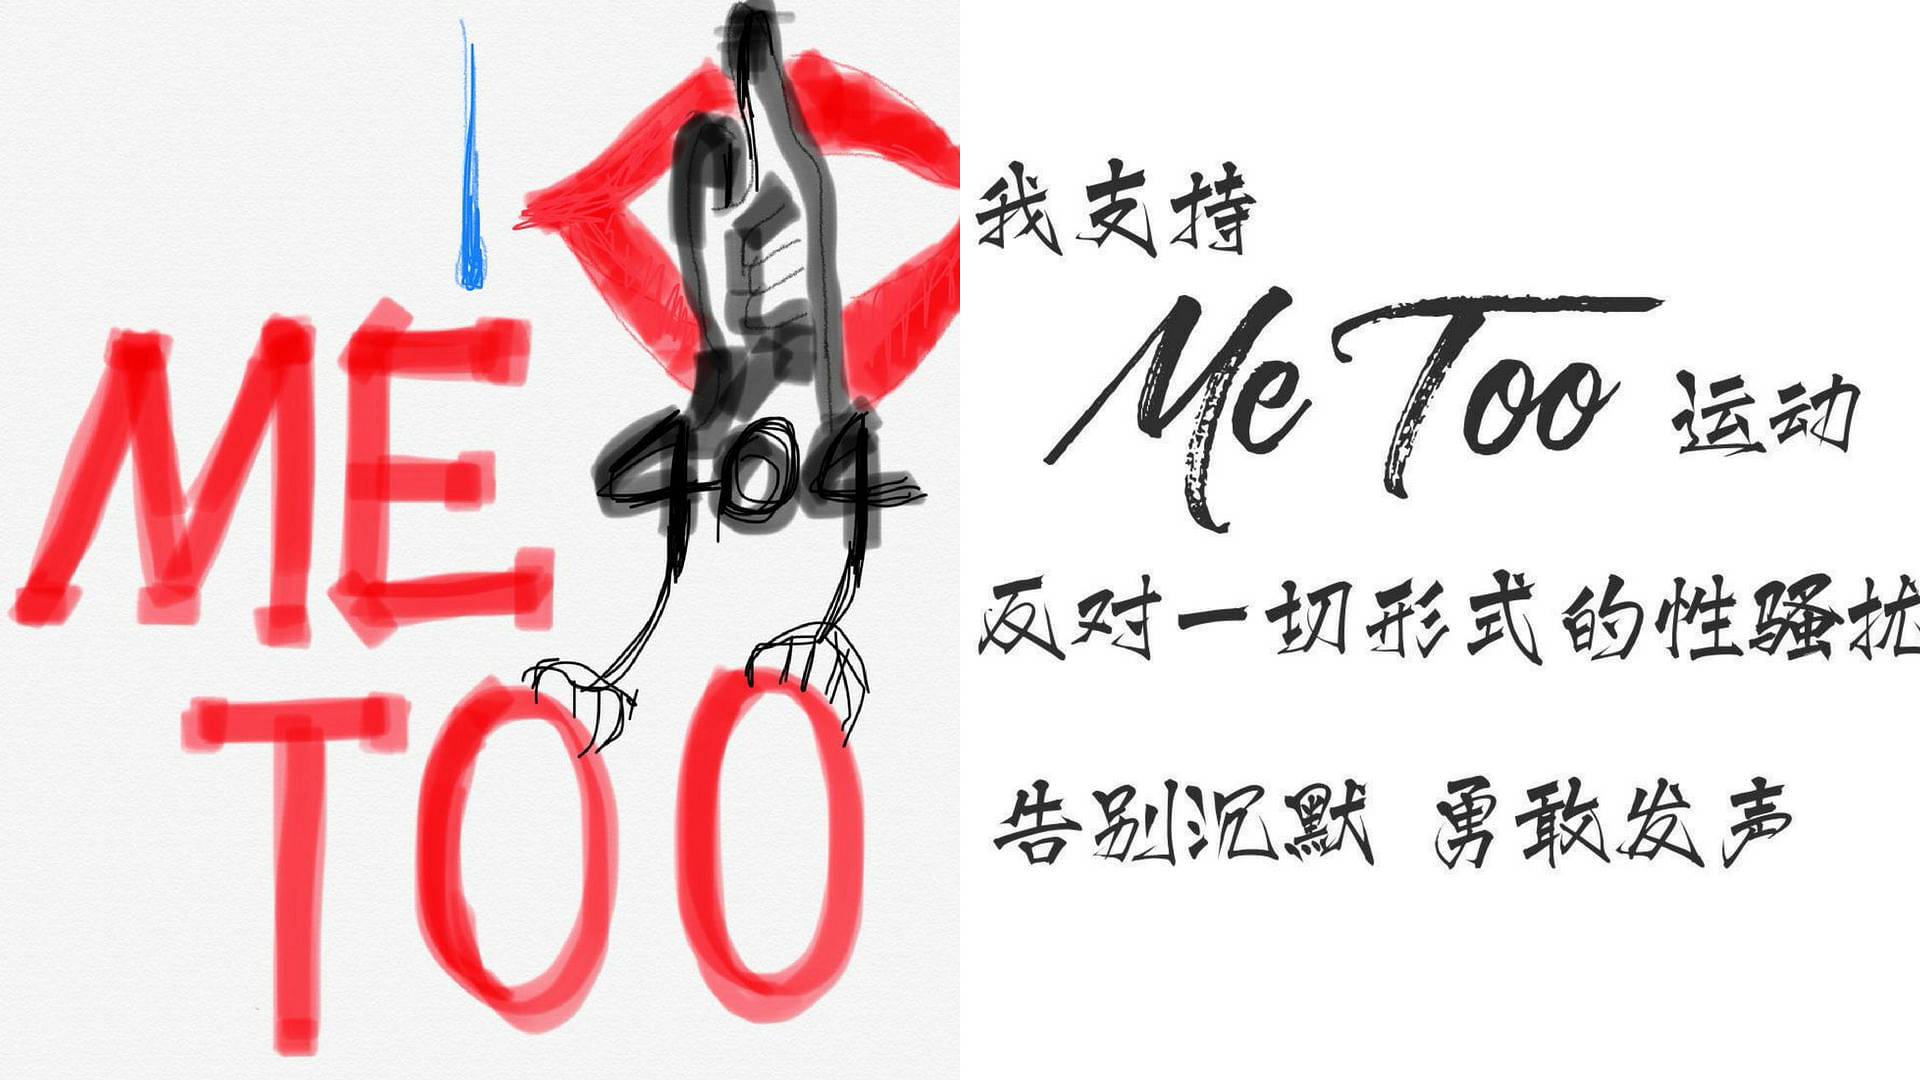 Twitter users shared these graphics in support of China’s #MeToo movement.